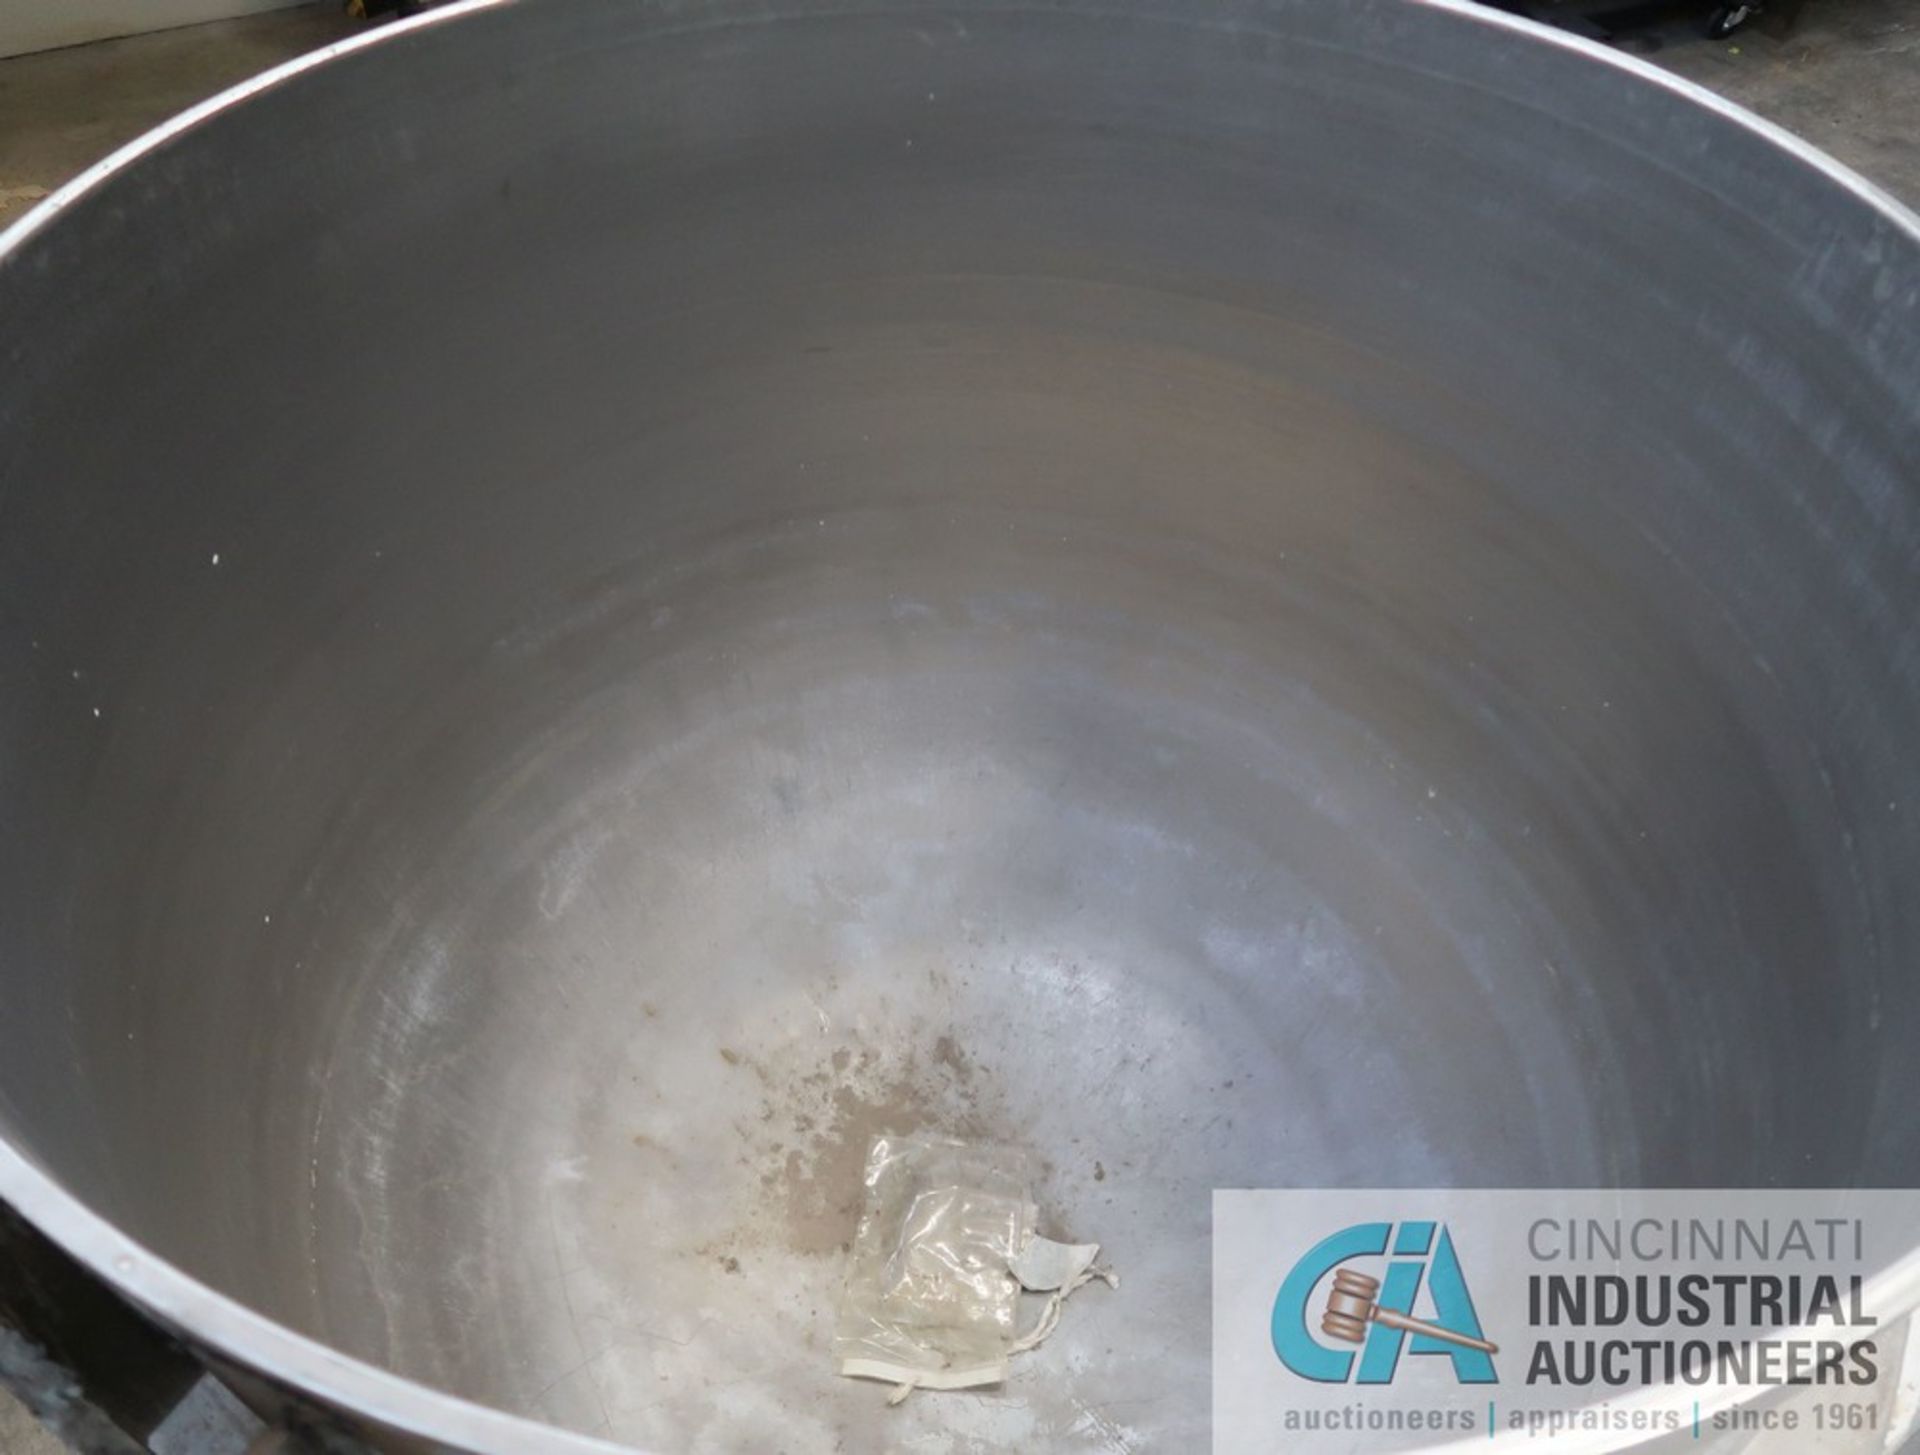 245 GALLON STAINLESS STEEL PORTABLE MIXING BOWL - Image 3 of 3